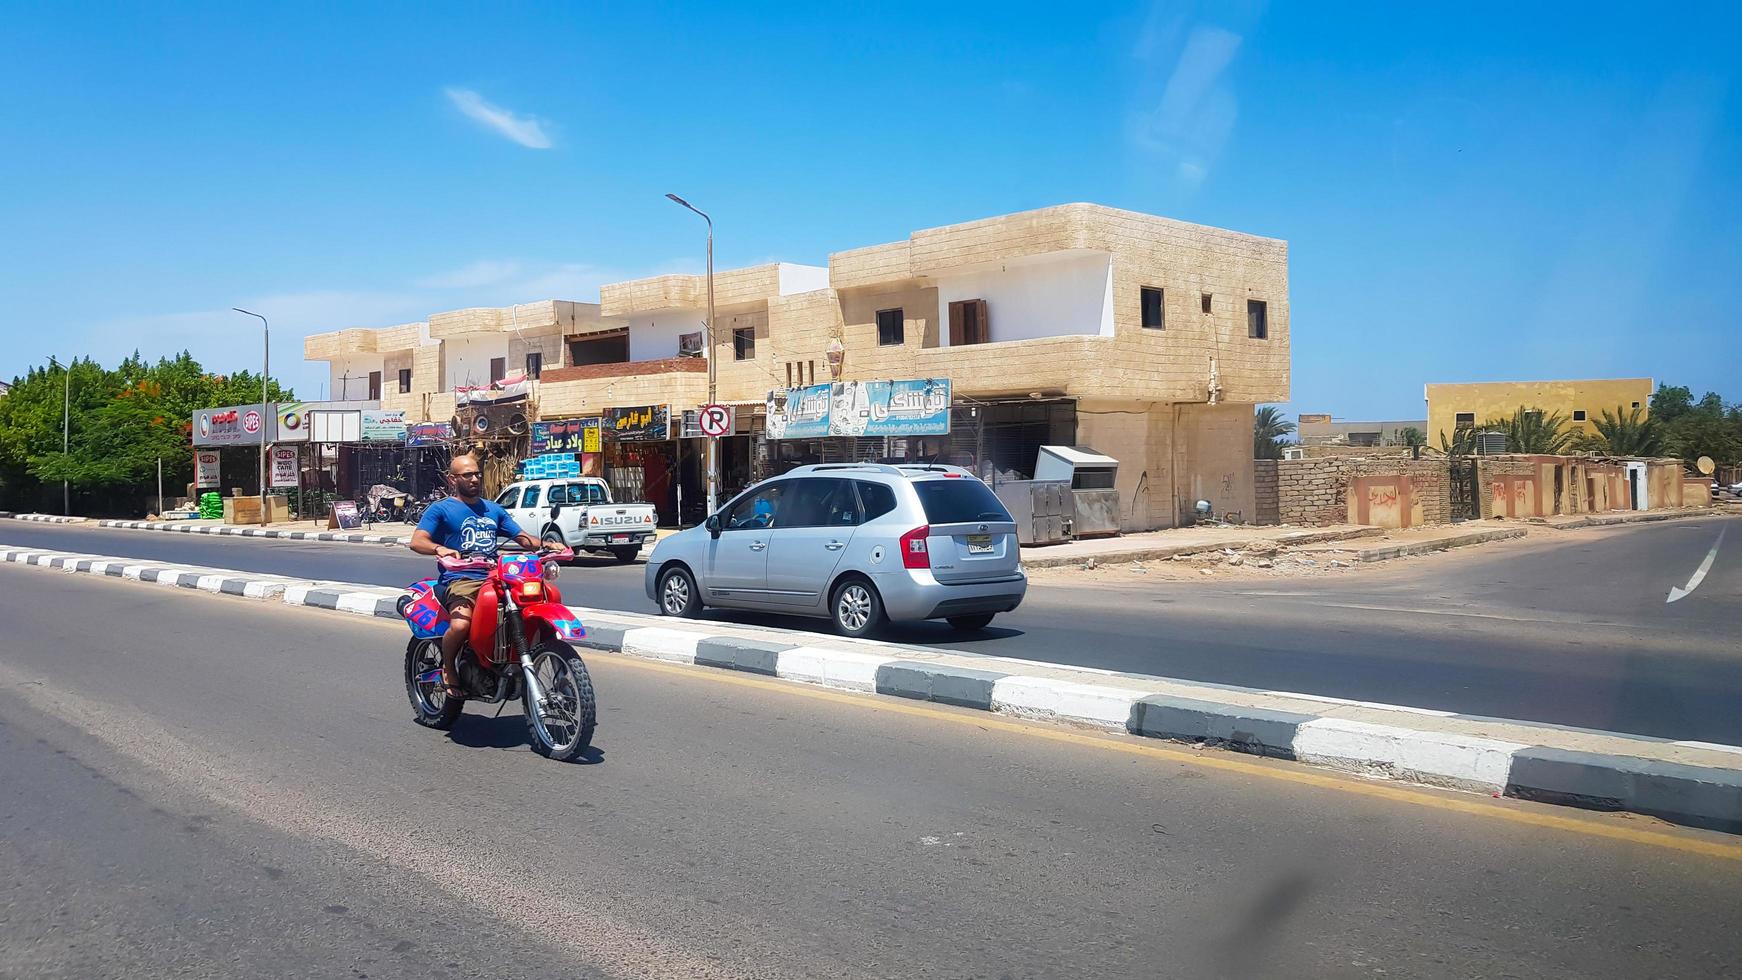 Egypt, Dahab - June 20, 2019. an Arab riding a scooter along one of the streets of Dahab. Desert Street. Egyptian residential buildings. The city of Dahab. photo